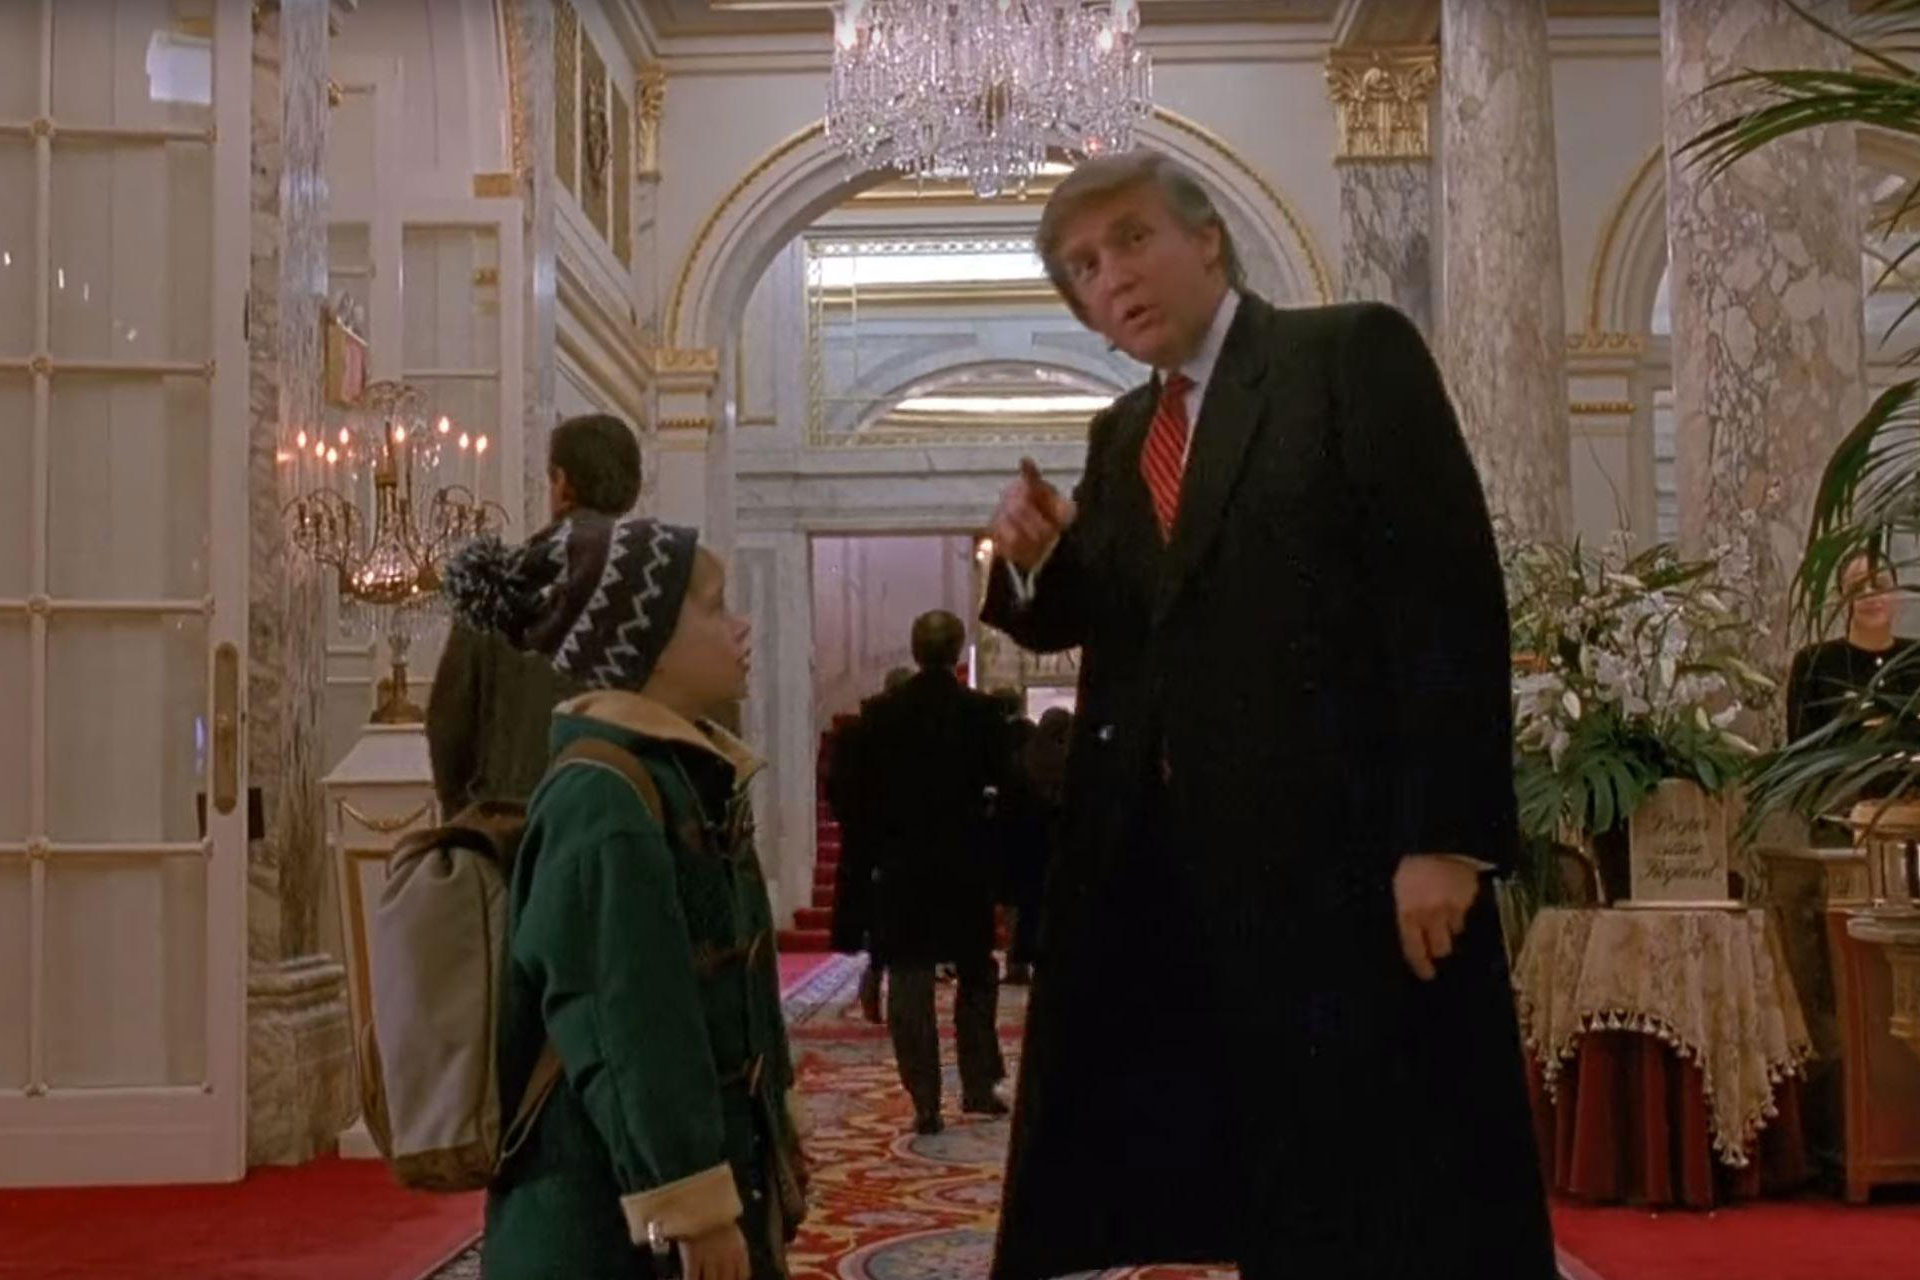 A future president meets the cast of home alone 2